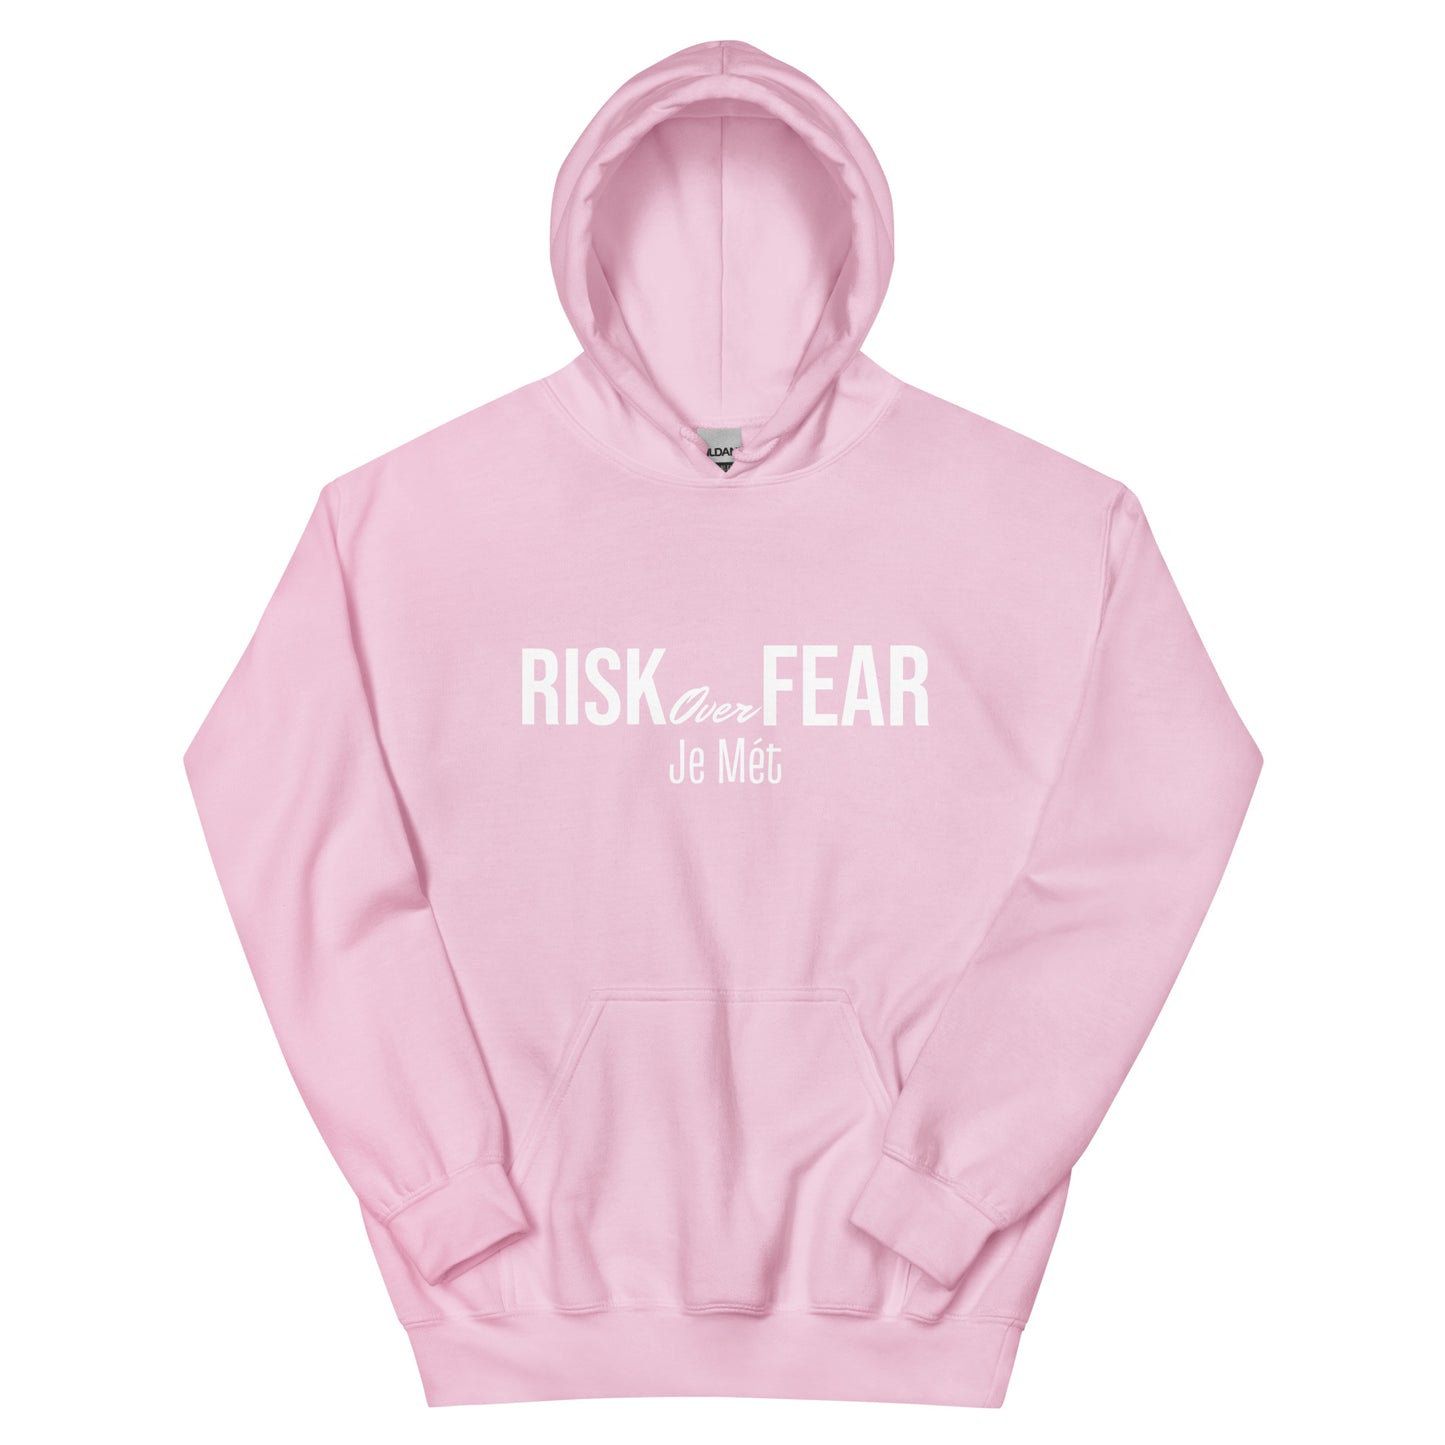 Risk Over Fear Unisex Hoodie